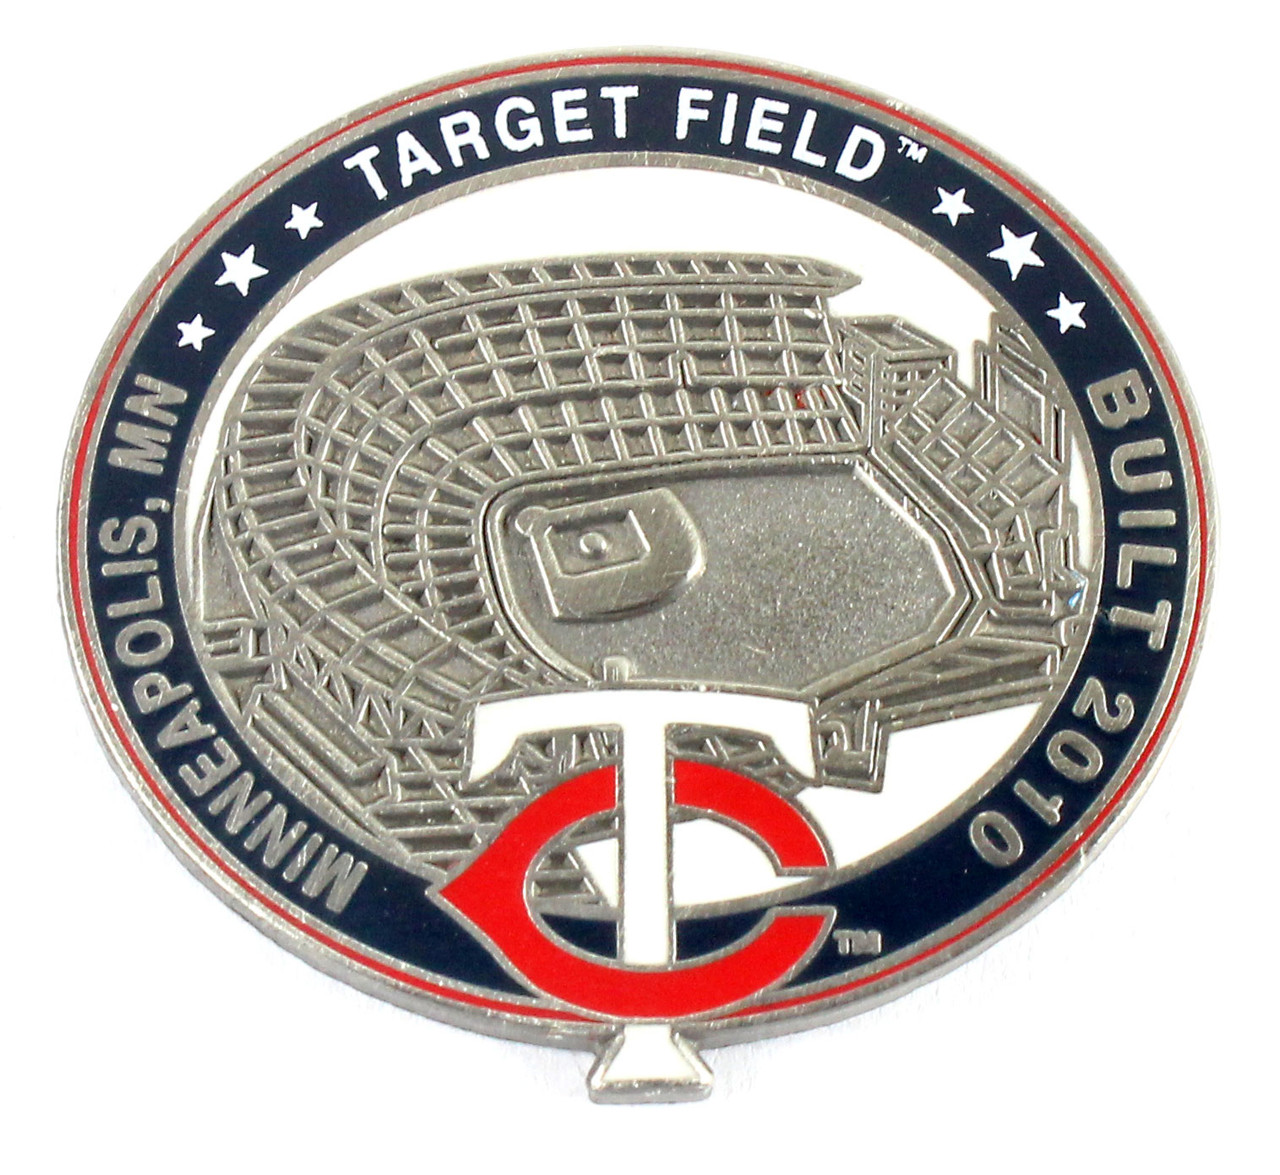 2014 MLB All-star Game Jersey Patch In Minnesota Twins (Target Field)